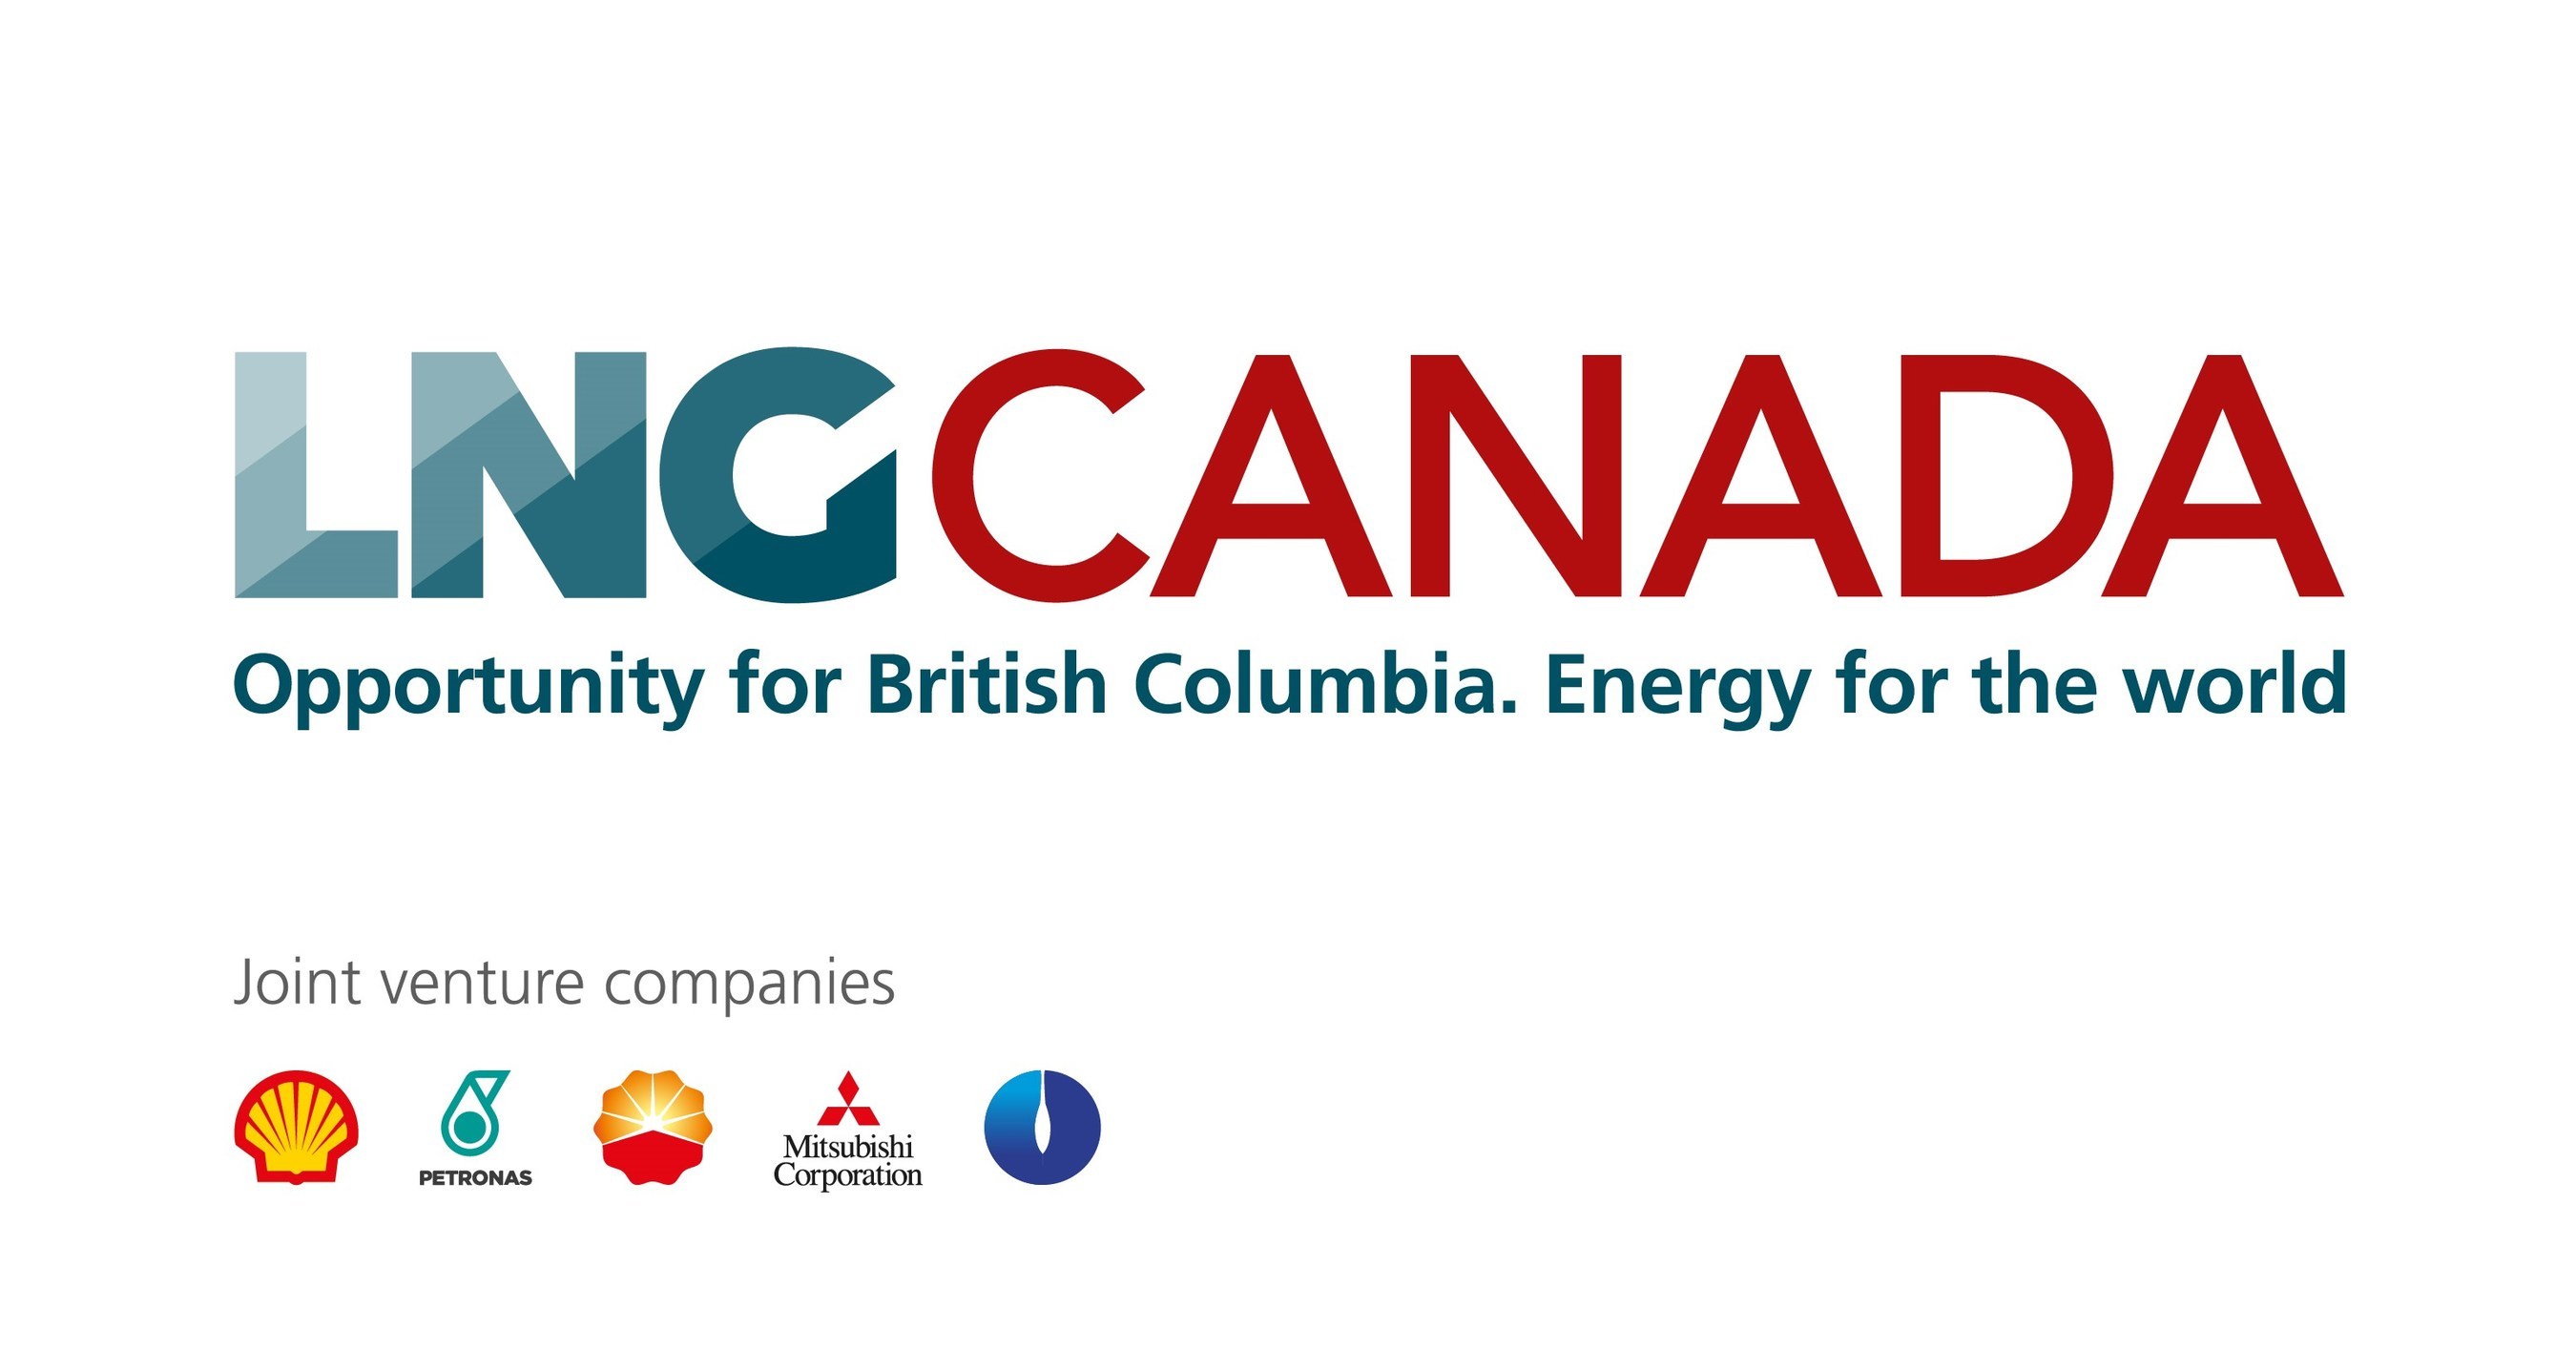 LNG Canada approves 937 million in contracts and subcontracts to First